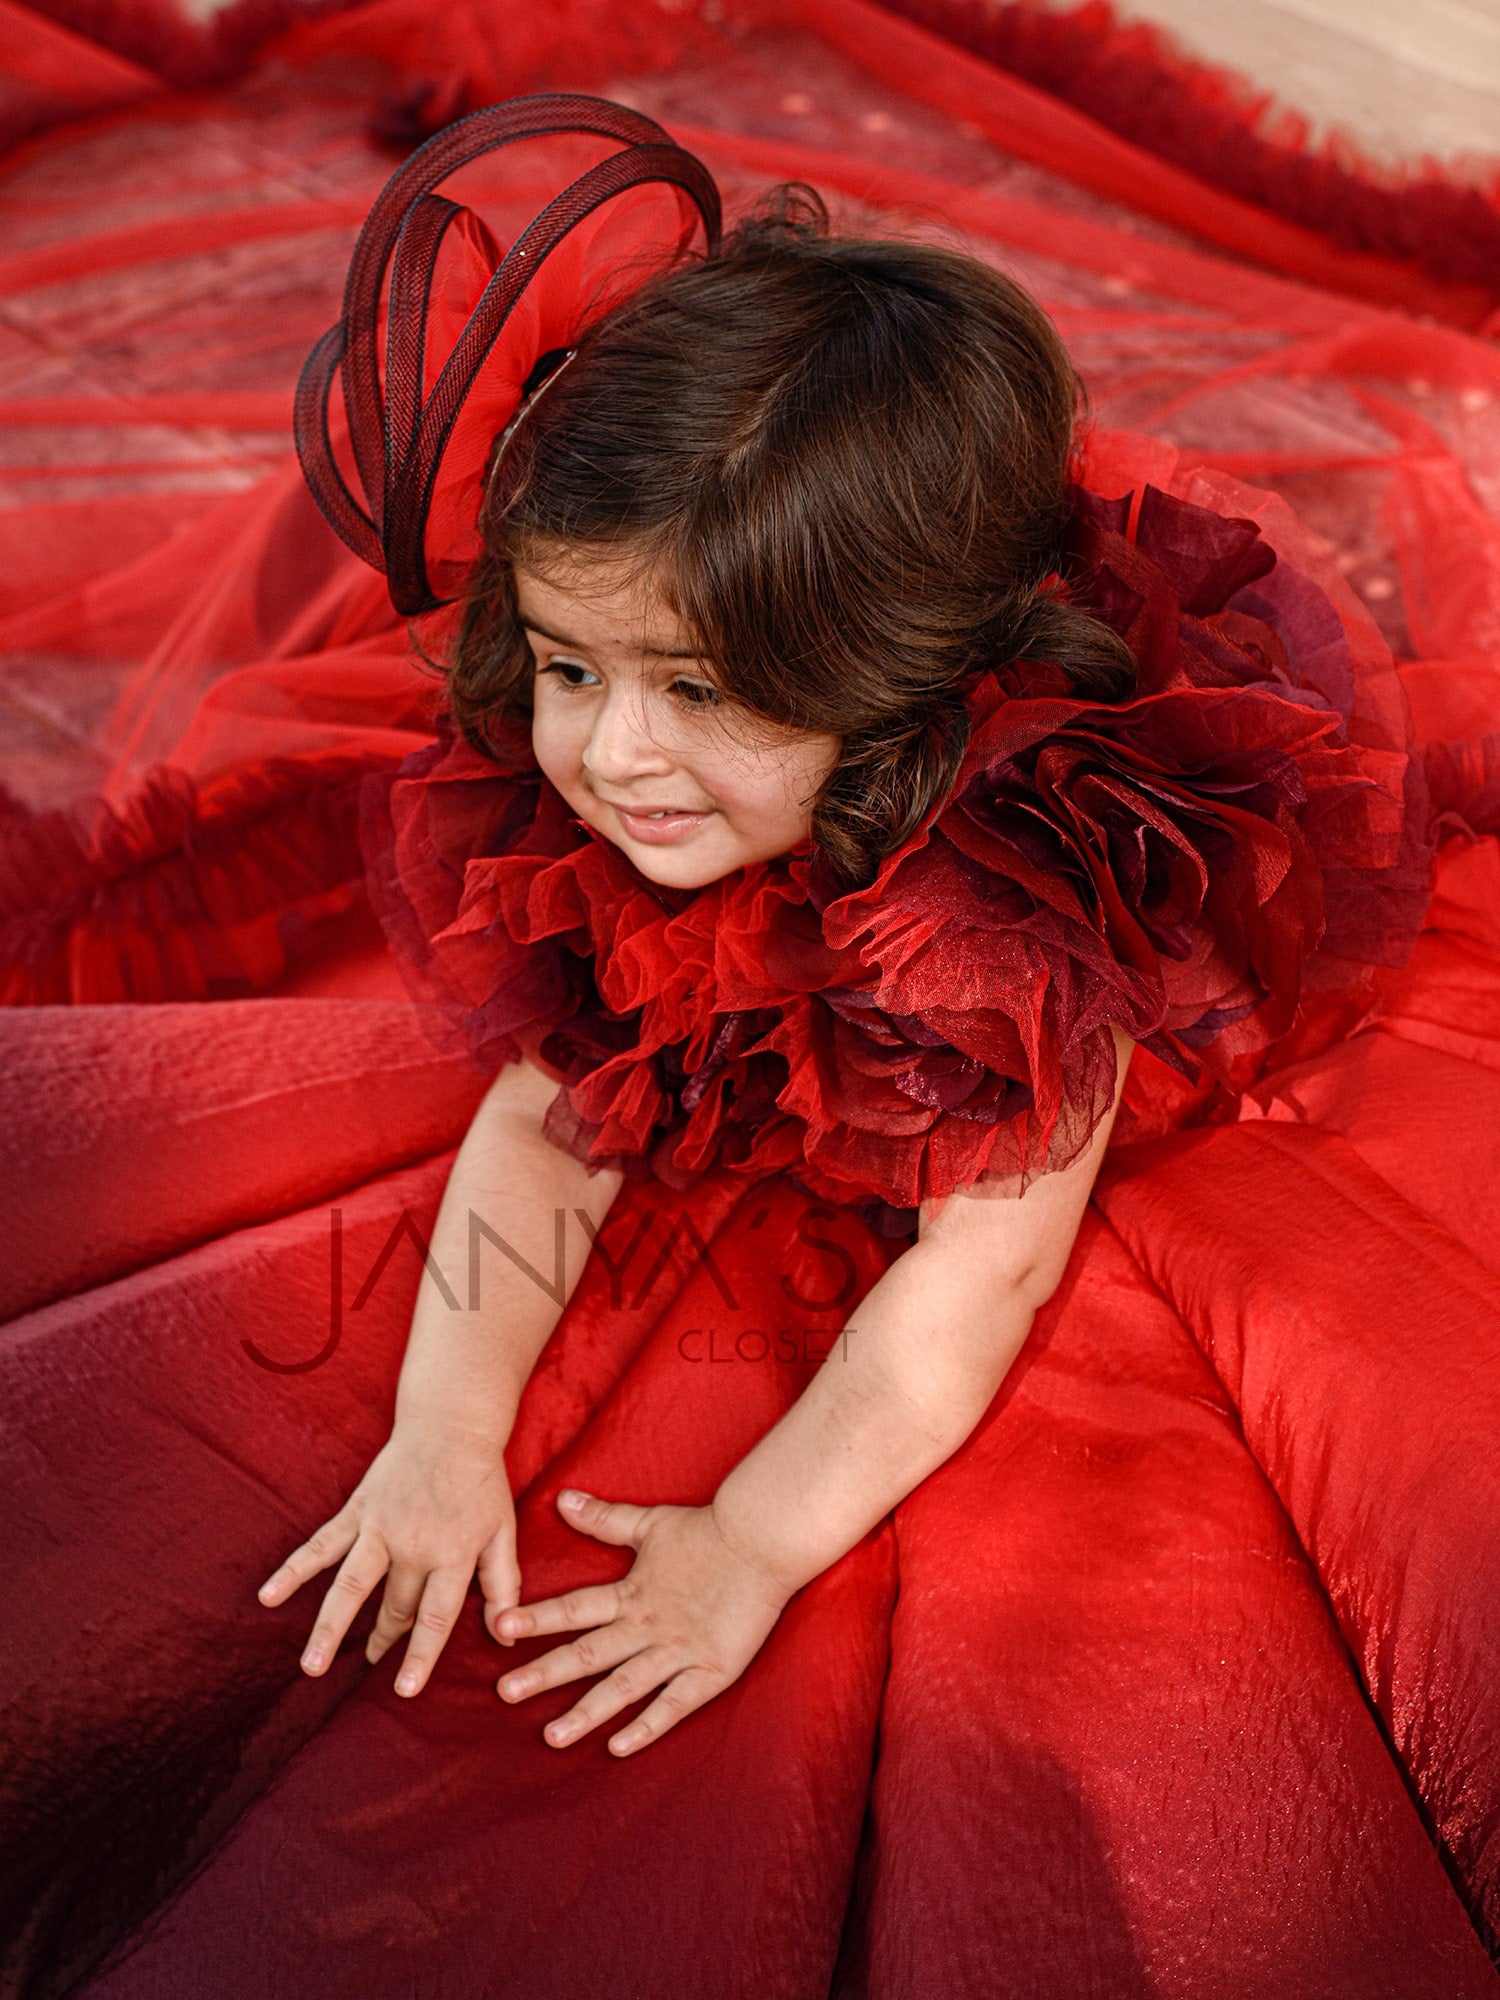 Shaded Red Couture Gown With Hair Accessory